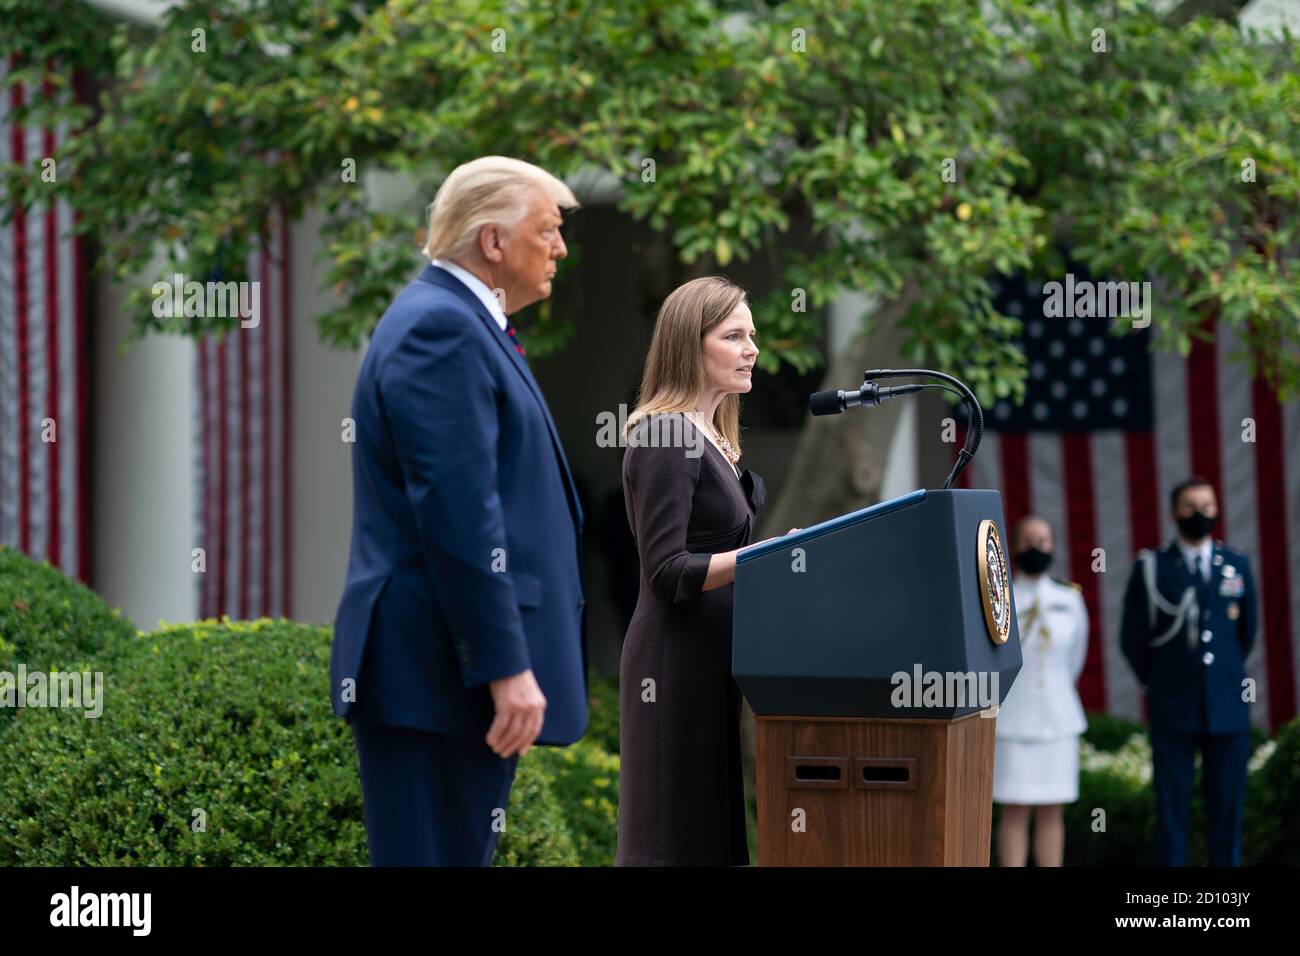 President Trump Nominates Judge Amy Coney Barrett for Associate Justice of the U.S. Supreme Court. This is the event that some believe is a  super spreader gathering where the president acquired or  spread COVID 19 to multiple attendees. President Donald J. Trump listens as Judge Amy Coney Barrett, his nominee for Associate Justice of the Supreme Court of the United States, addresses her remarks Saturday, September 26, 2020, in the Rose Garden of the White House. Stock Photo